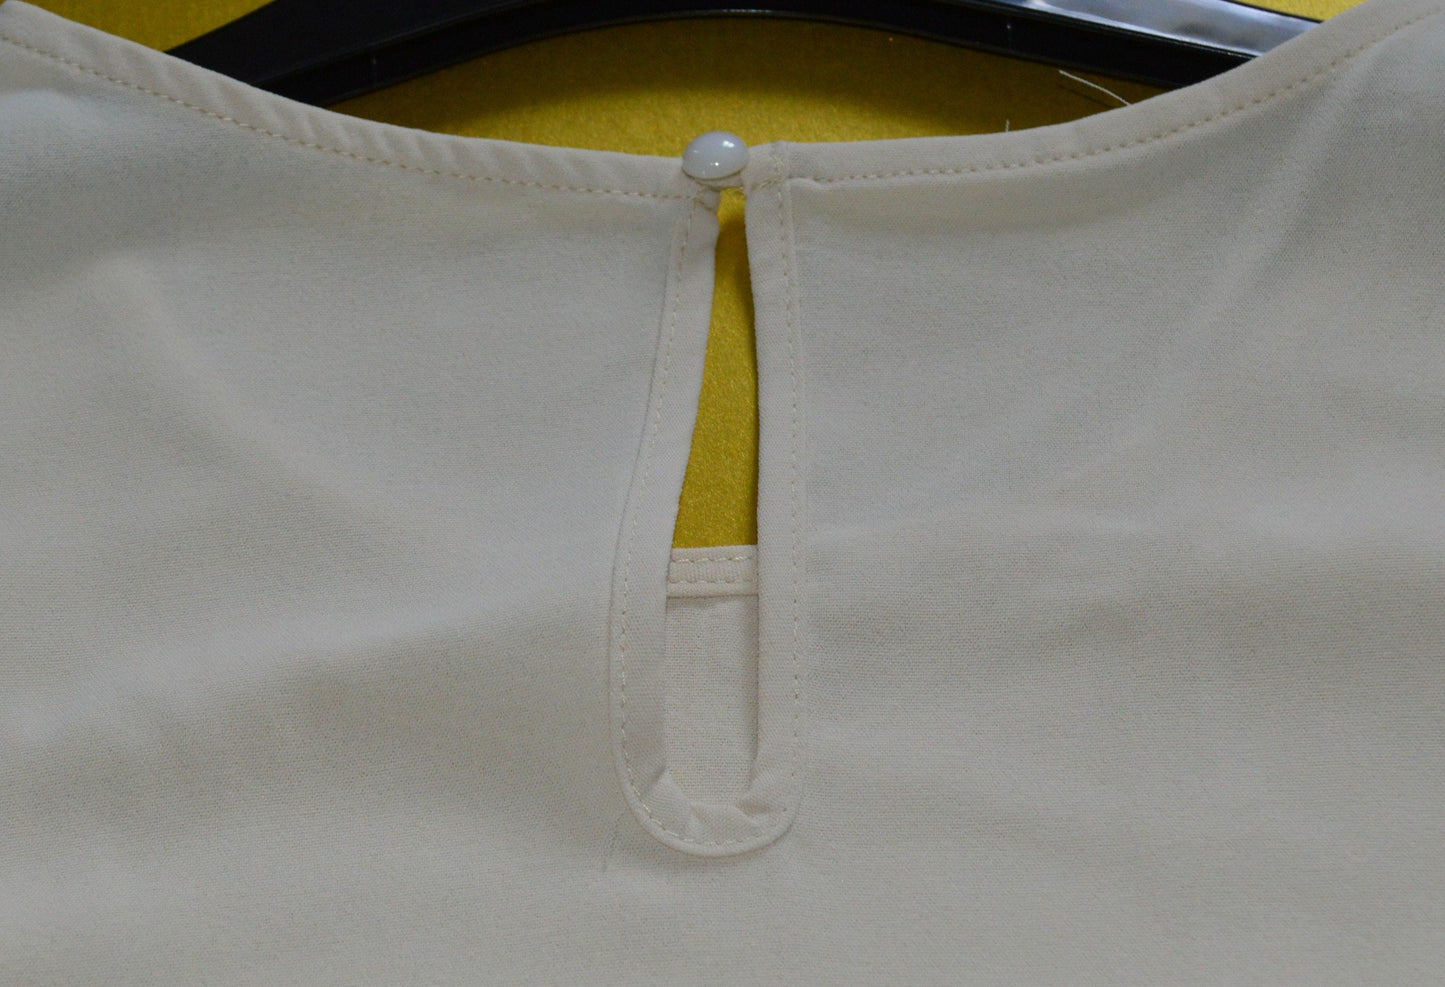  button closure at back